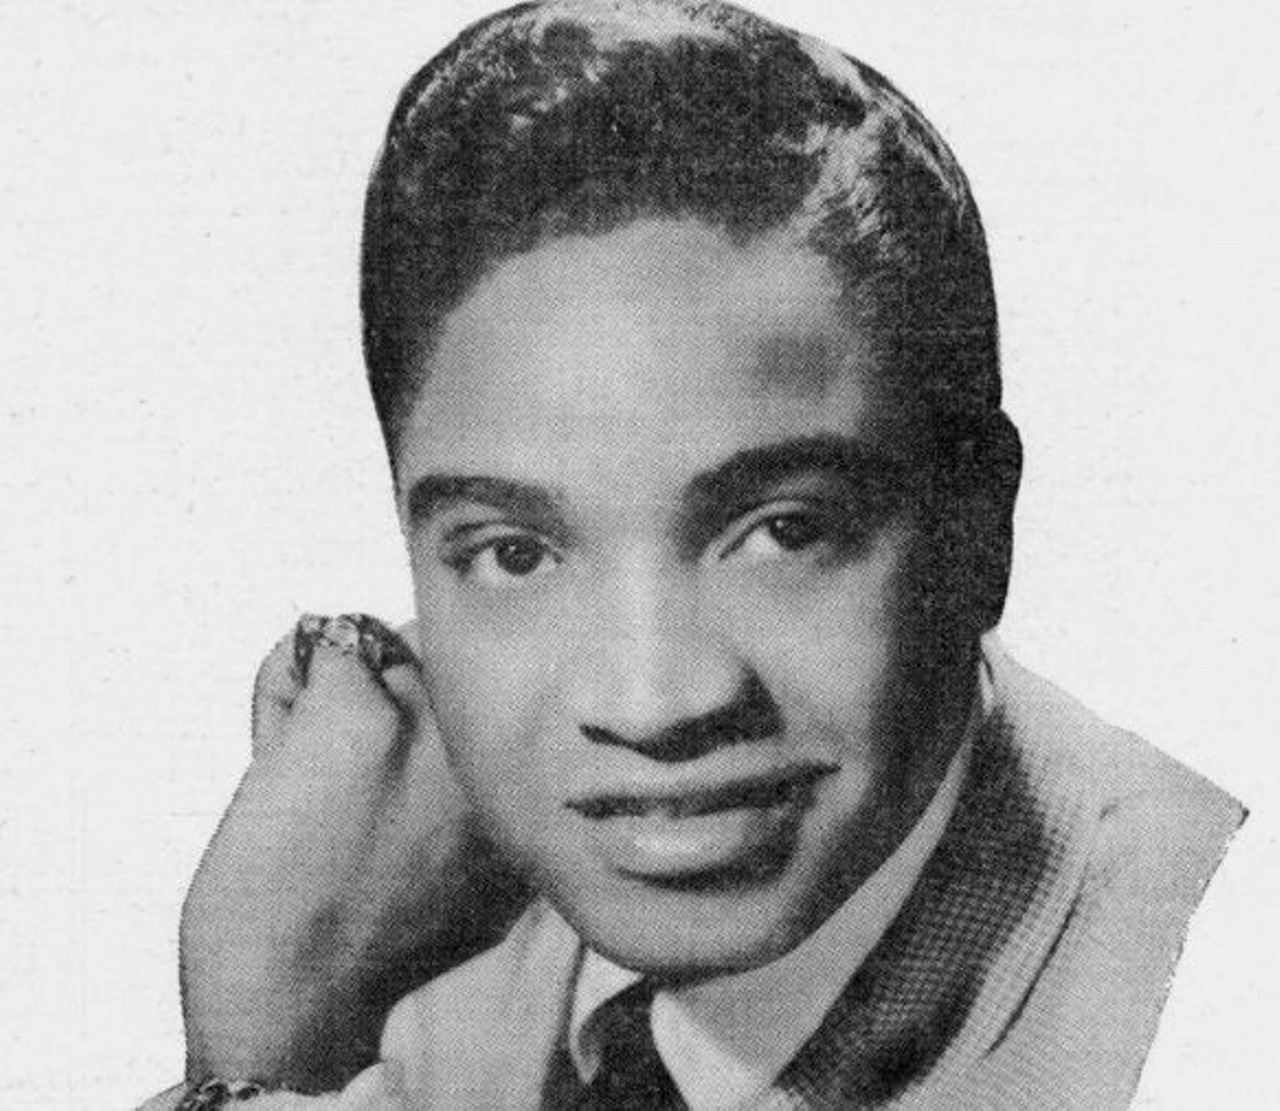 Jackie Wilson
Nicknamed &#147;Mr. Excitement&#148; for his enthusiasm during performances, Jackie Wilson was a talented soul, pop, and rhythm and blues singer. After his death in 1984, Wilson was buried in Westlawn Cemetery in Wayne.
Photo via Brunswick Records / Wikimedia Commons